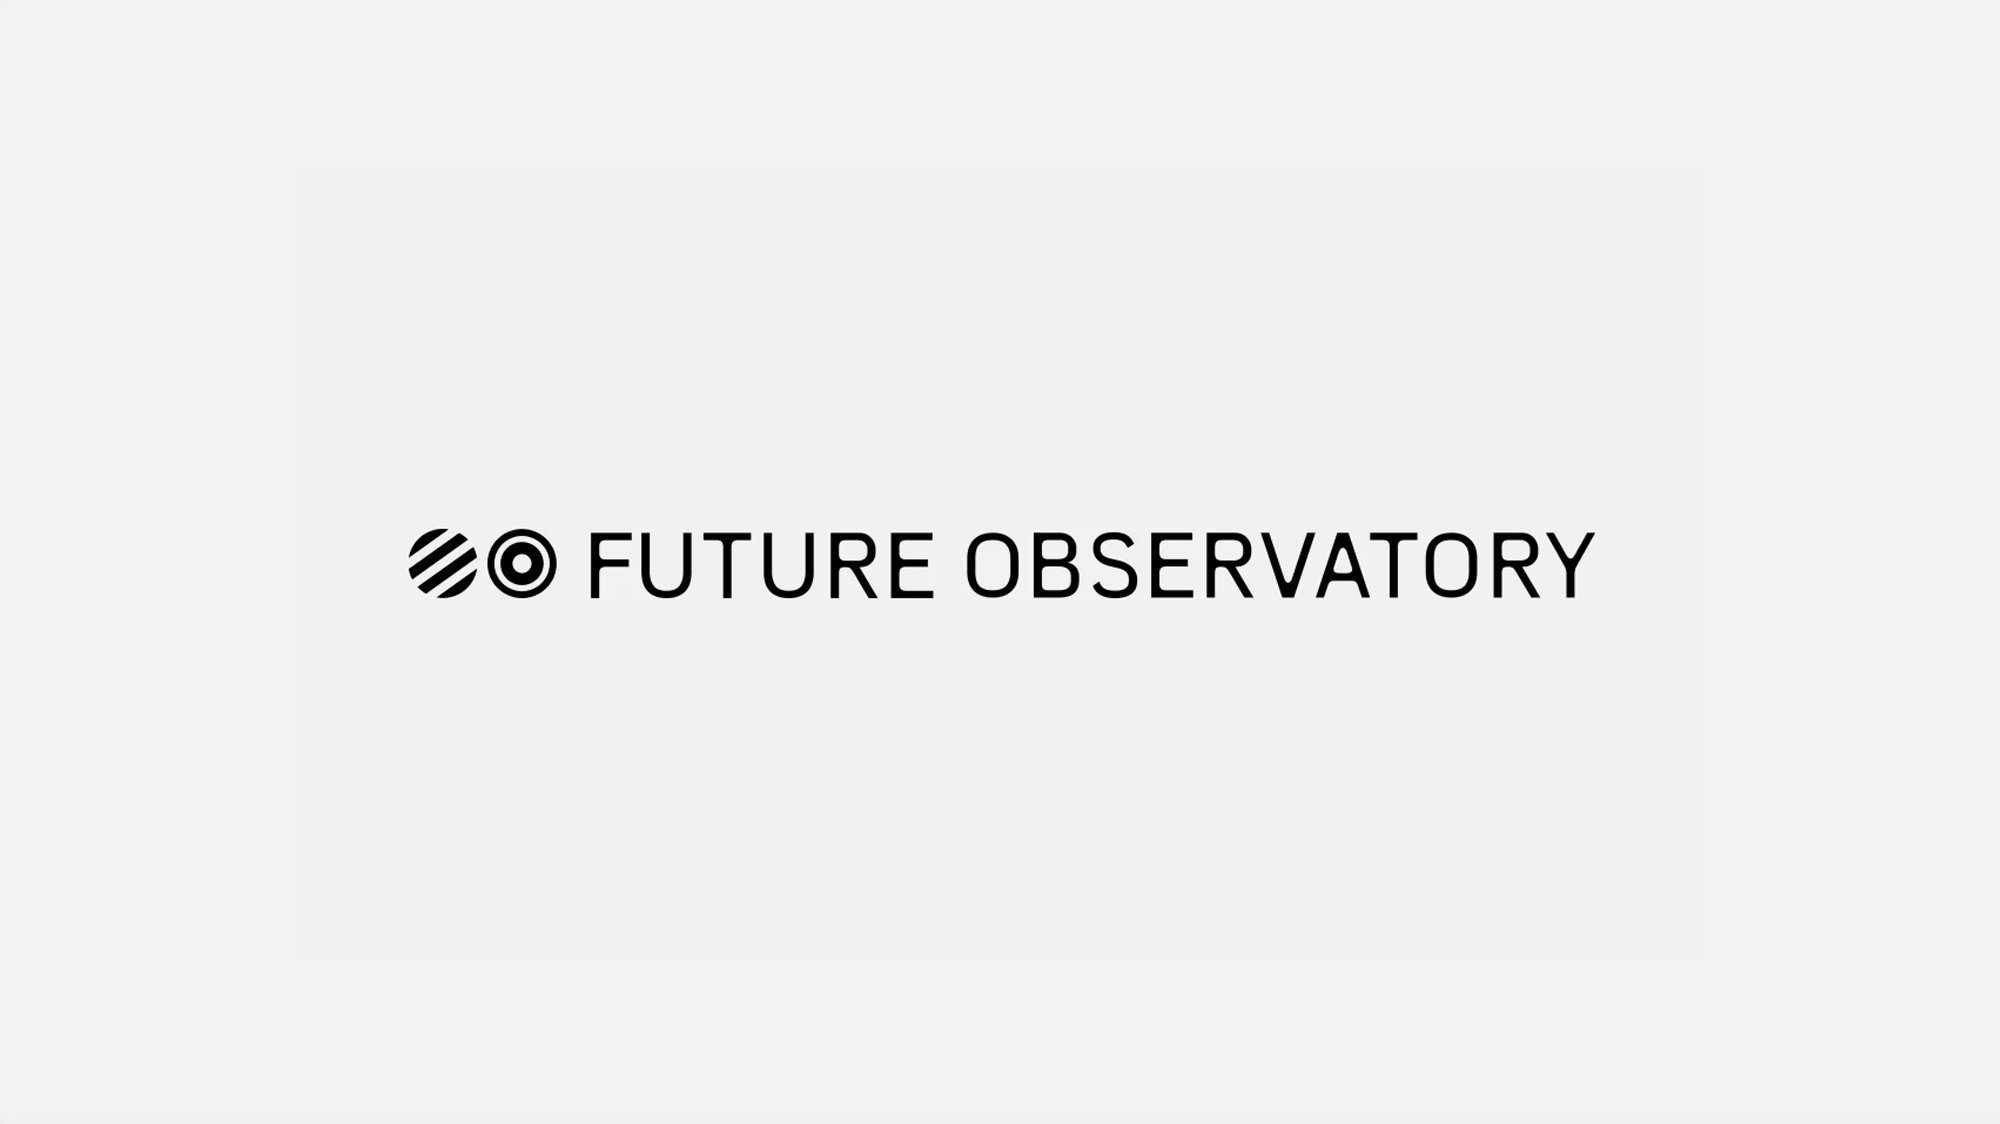 Brand identity by London-based SPIN for London-based design research organisation Future Observatory